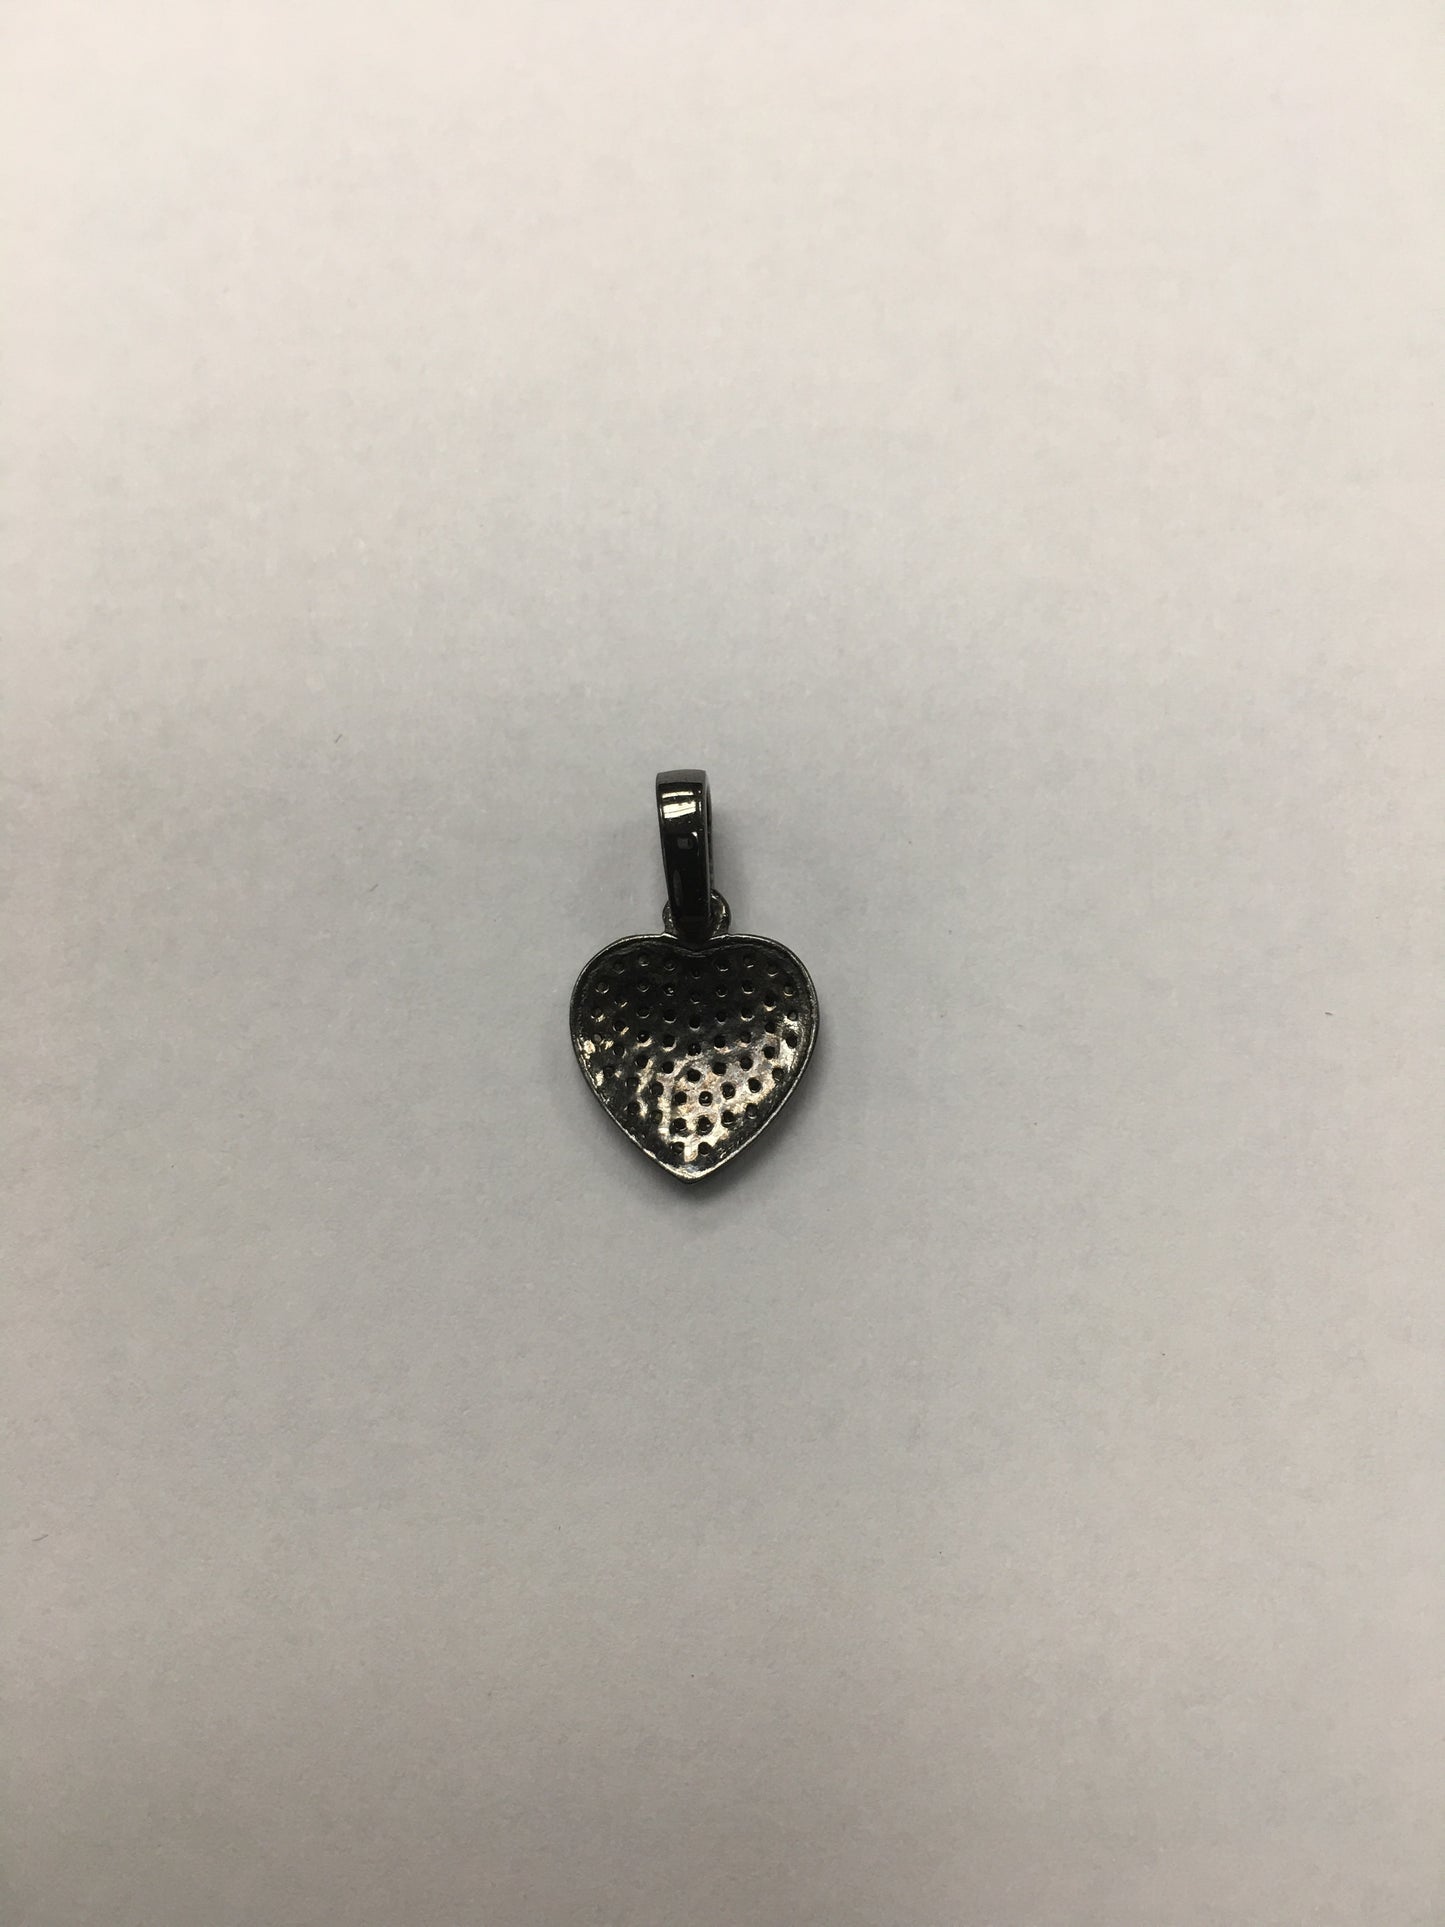 Heart Diamond Charm .925 Oxidized Sterling Silver Diamond Charms, Genuine handmade pave diamond Charm Size Approx 0.52"(12 x 13 MM)